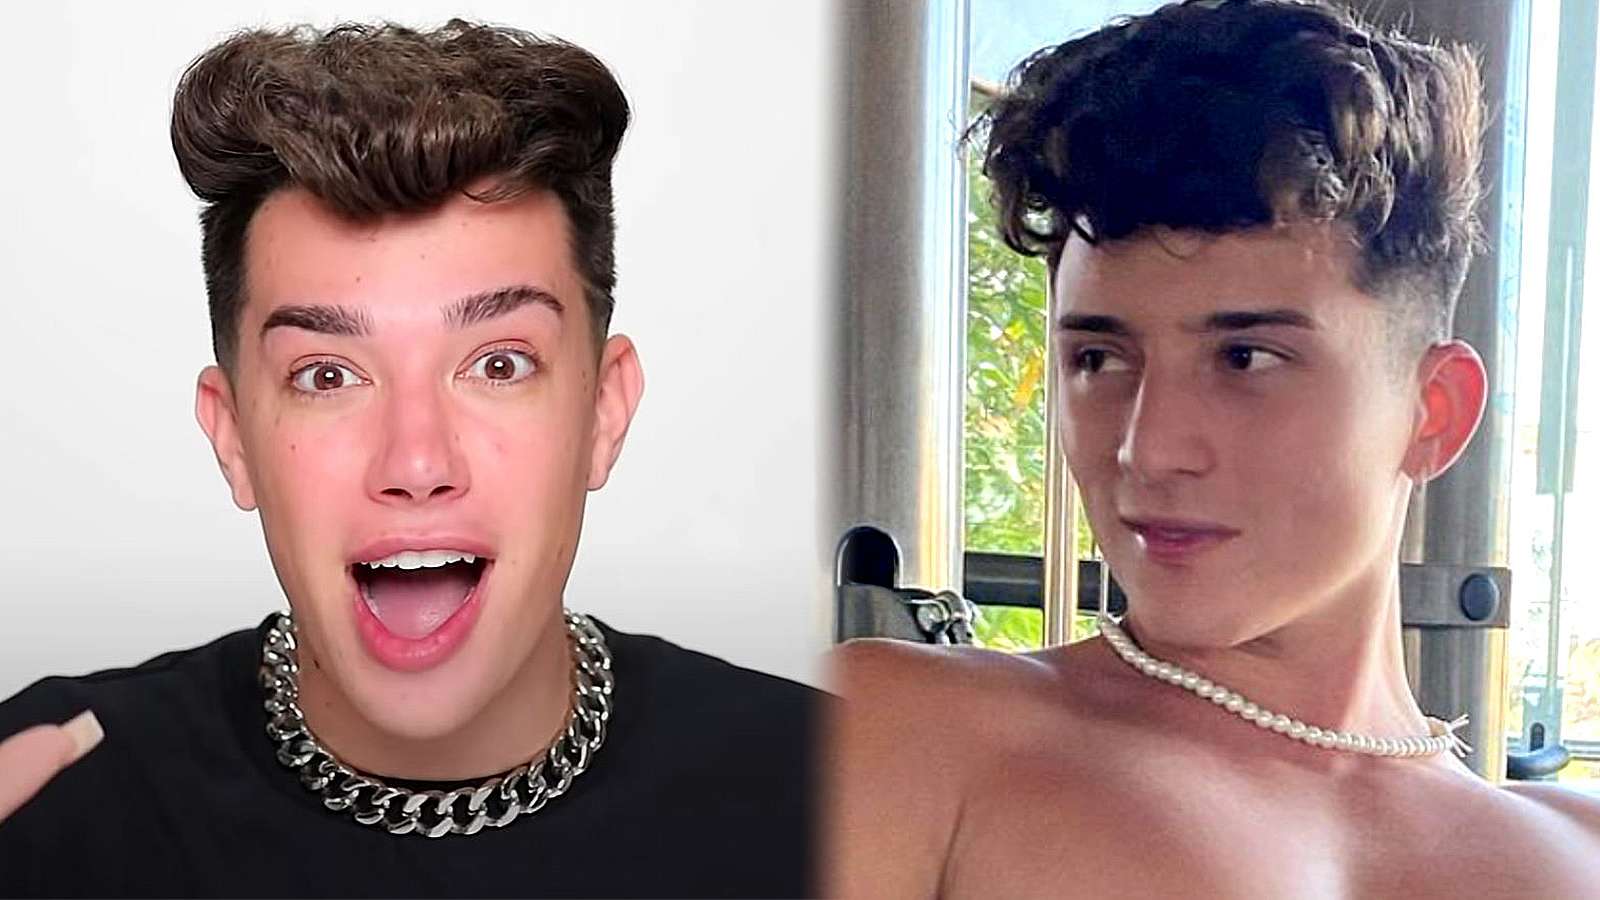 James Charles hits out at outrage over resurfaced video